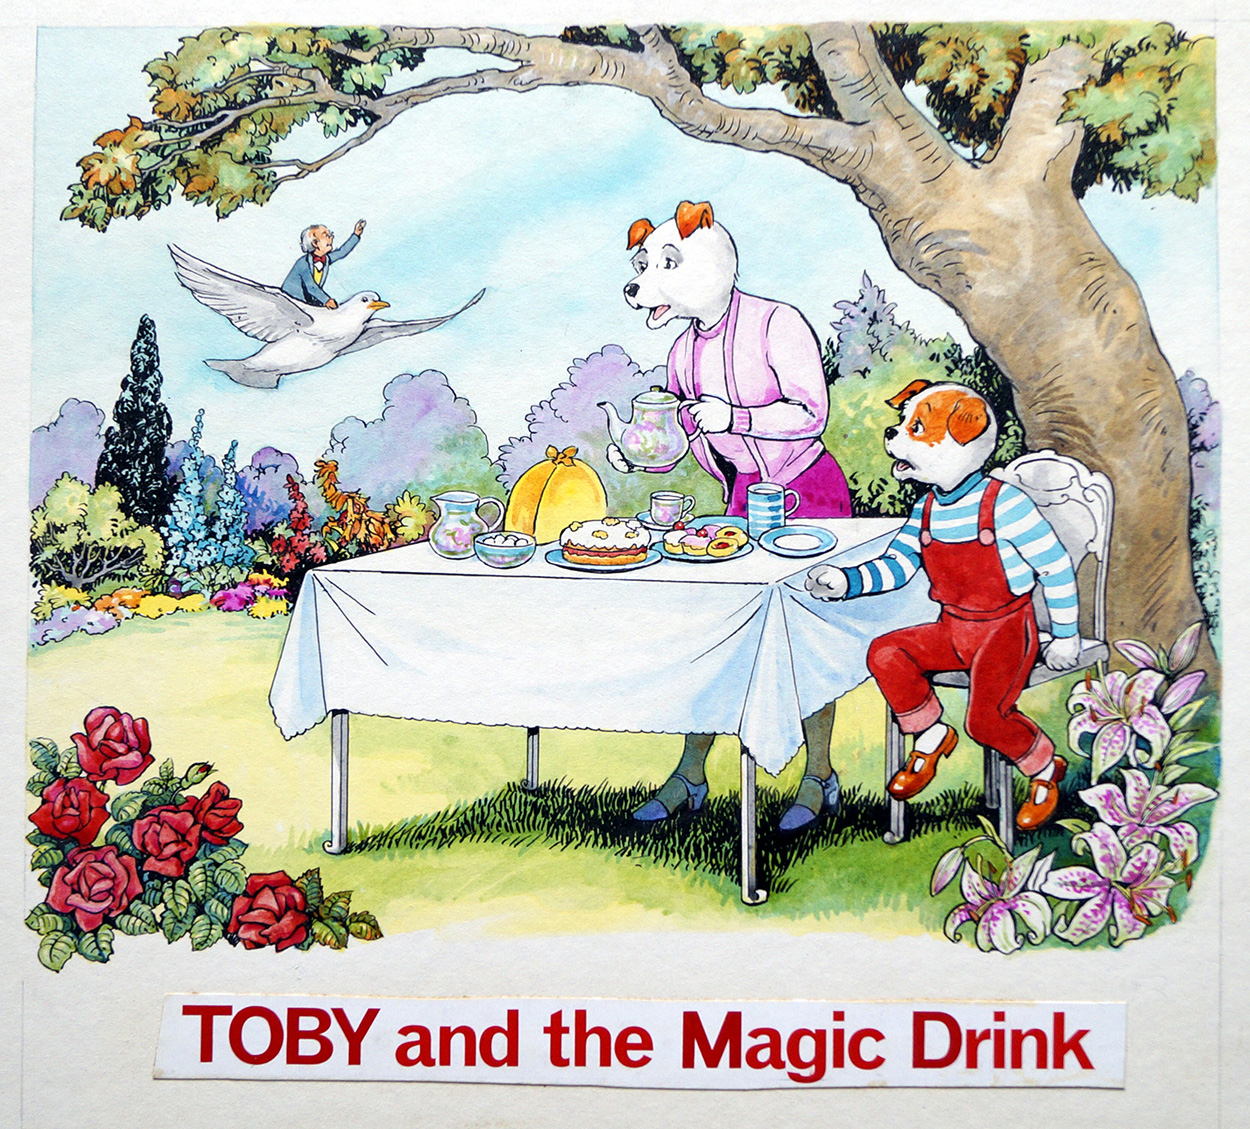 Toby and the Magic Drink (Original) art by Doris White at The Illustration Art Gallery